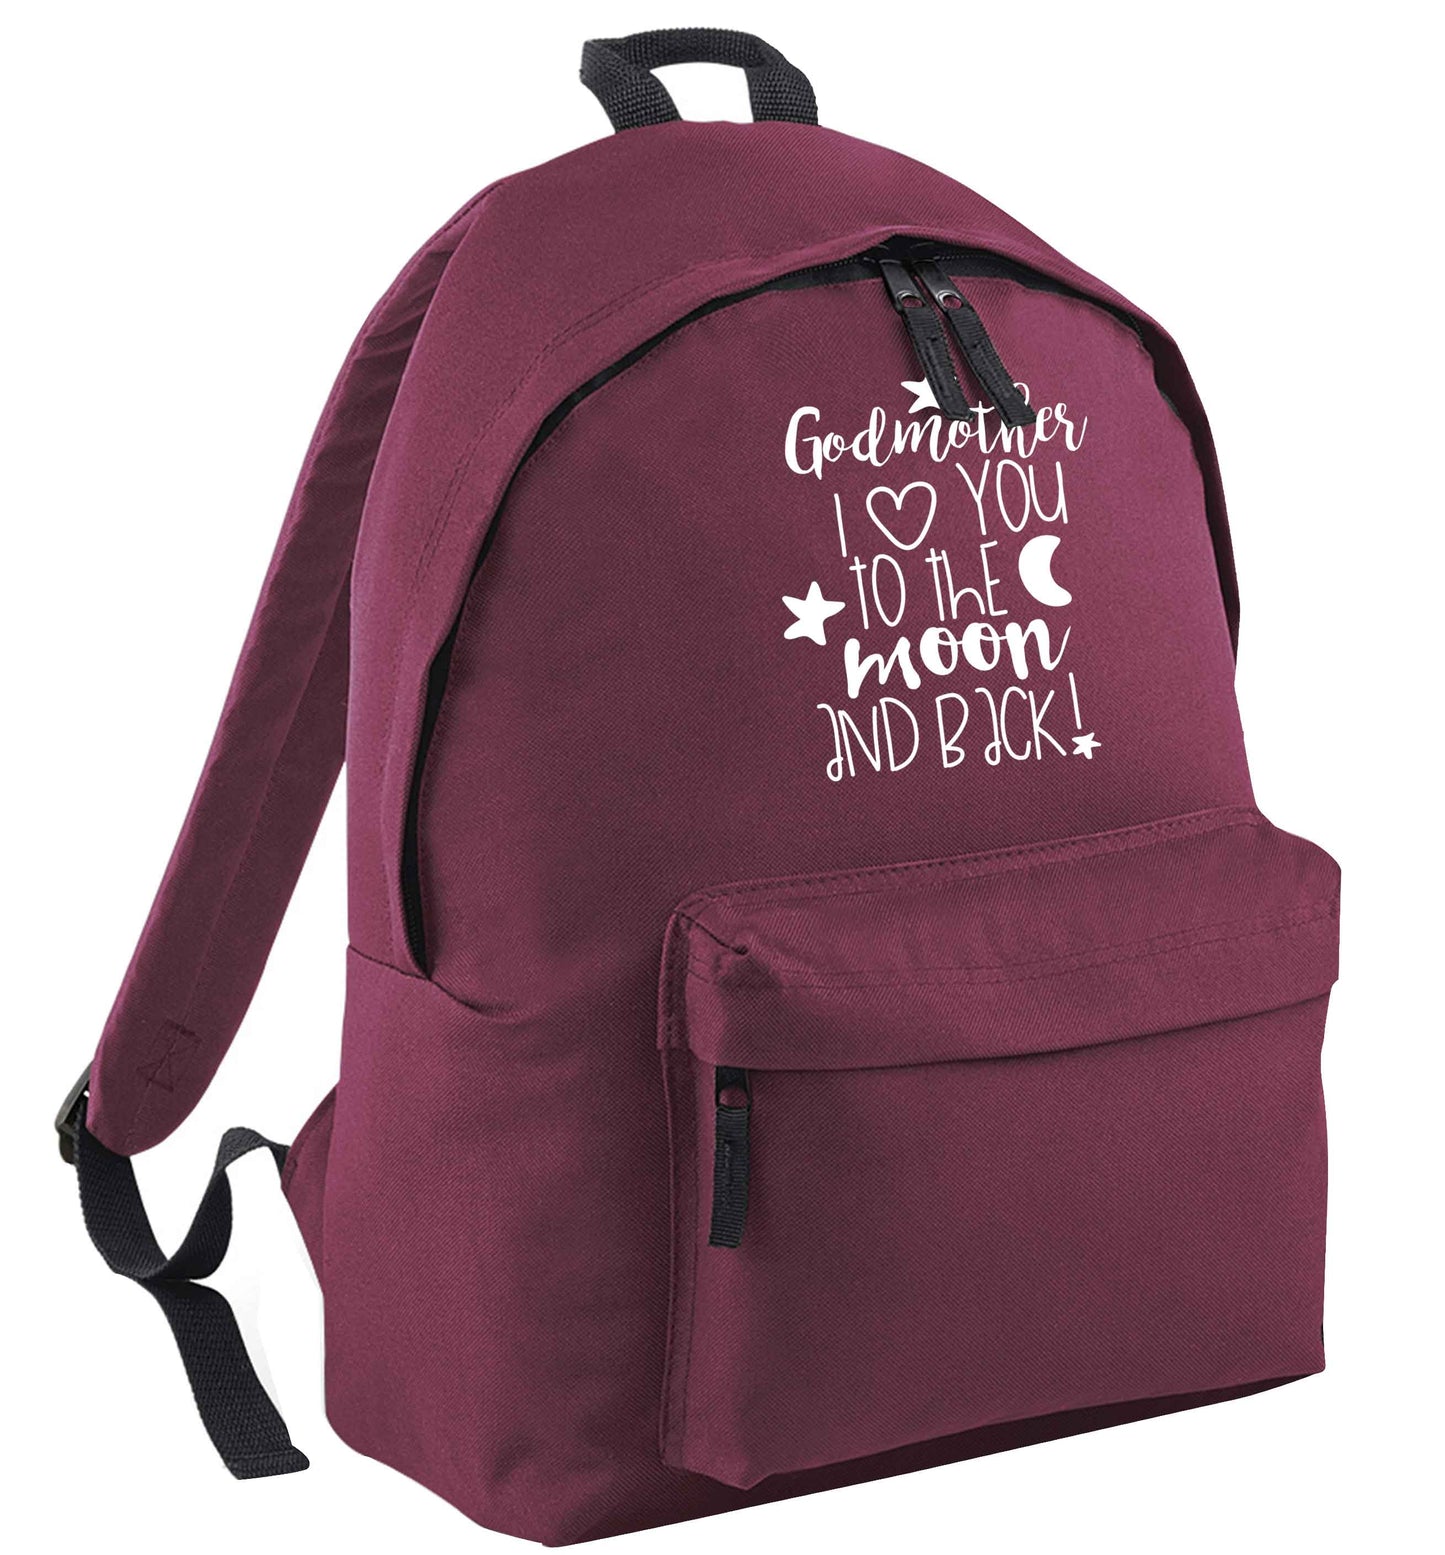 Godmother I love you to the moon and back maroon adults backpack